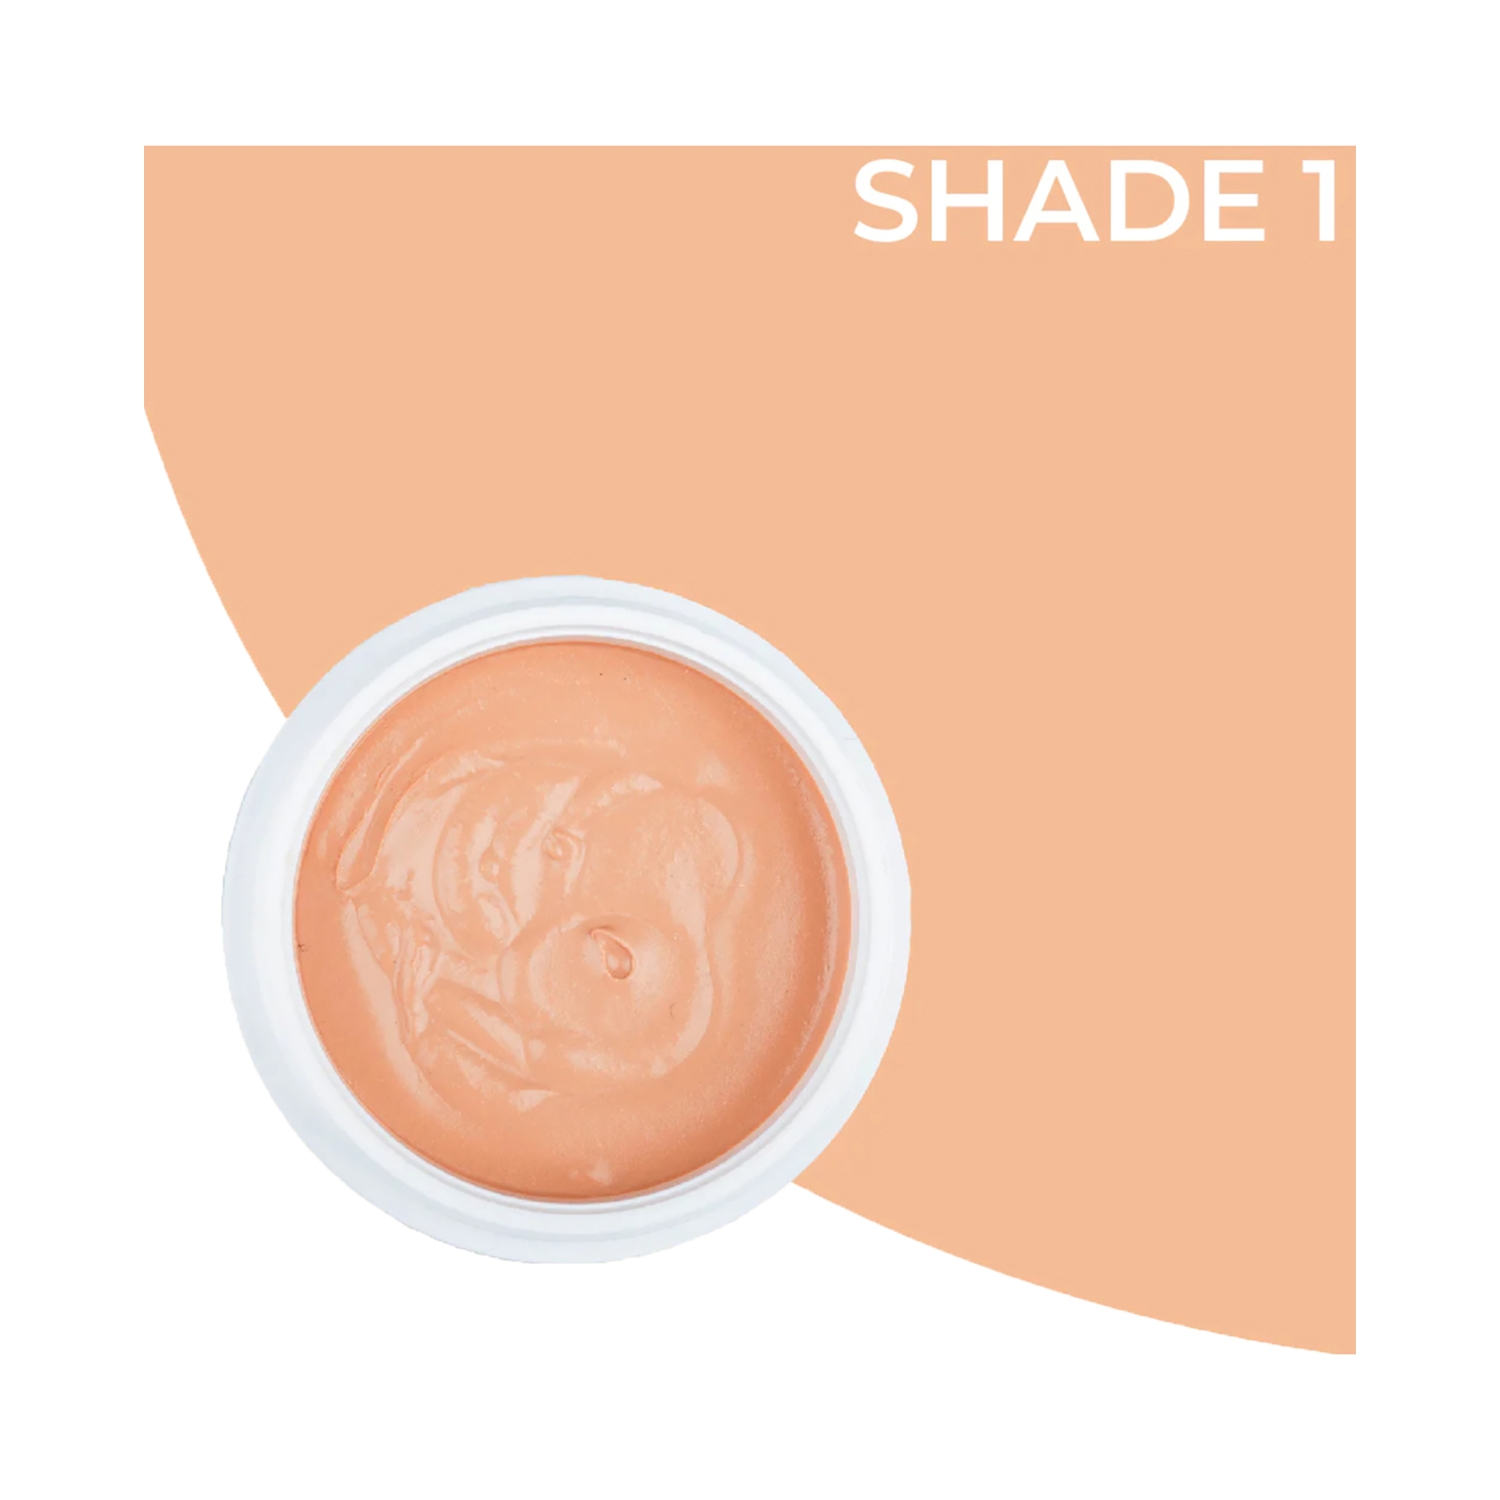 Harkoi | Harkoi Mineral Matte Sunscreen SPF35+ PA++++ for Light with Pink Undertone - Shade 1 (30g)